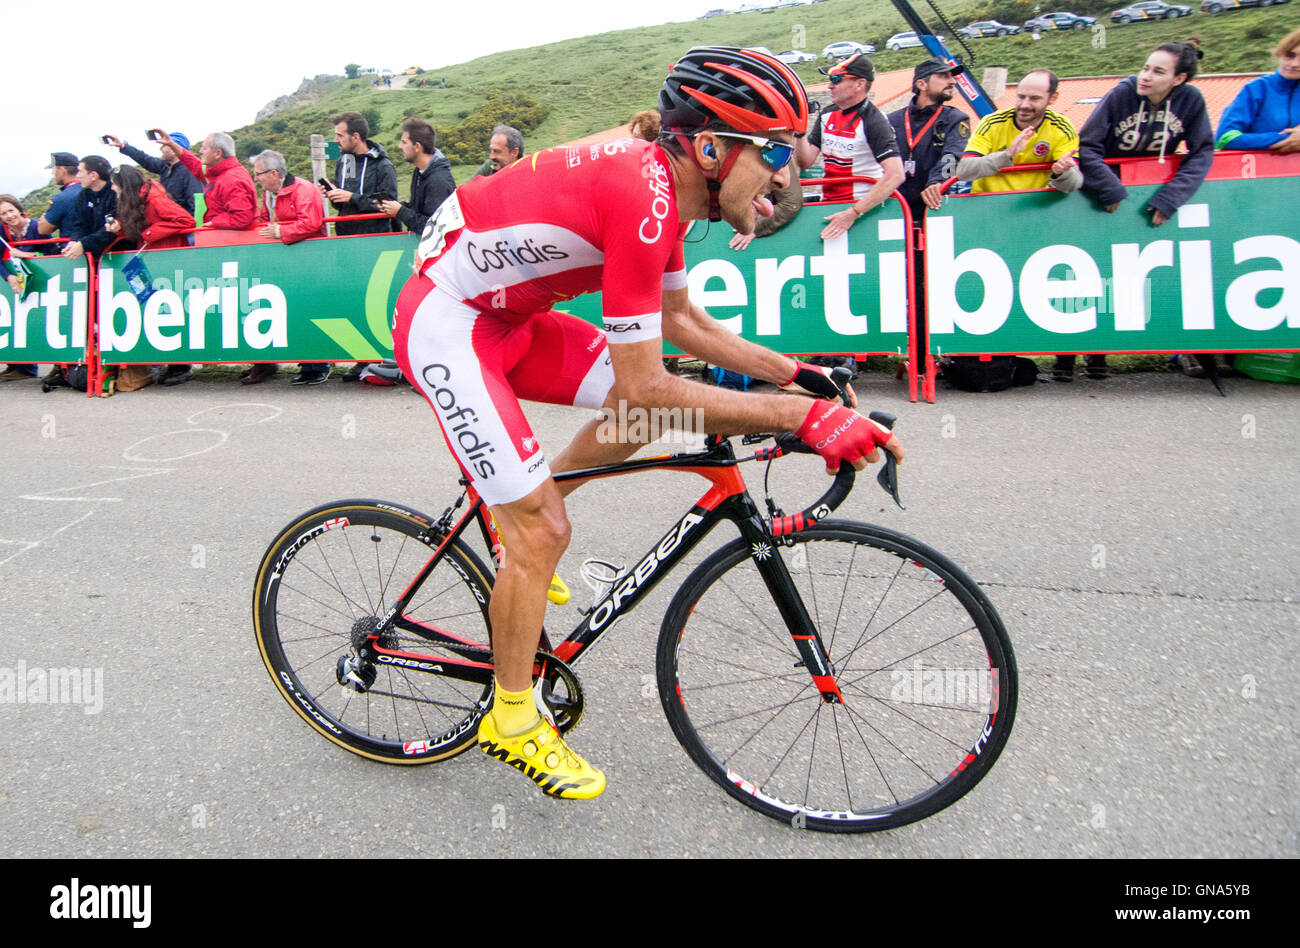 Covadonga, Spain. 29th August, 2016. Luis Angel Mate (Cofidis) finishes the  10th stage of cycling race 'La Vuelta a España' (Tour of Spain) between  Lugones and Lakes of Covadonga on August 29,